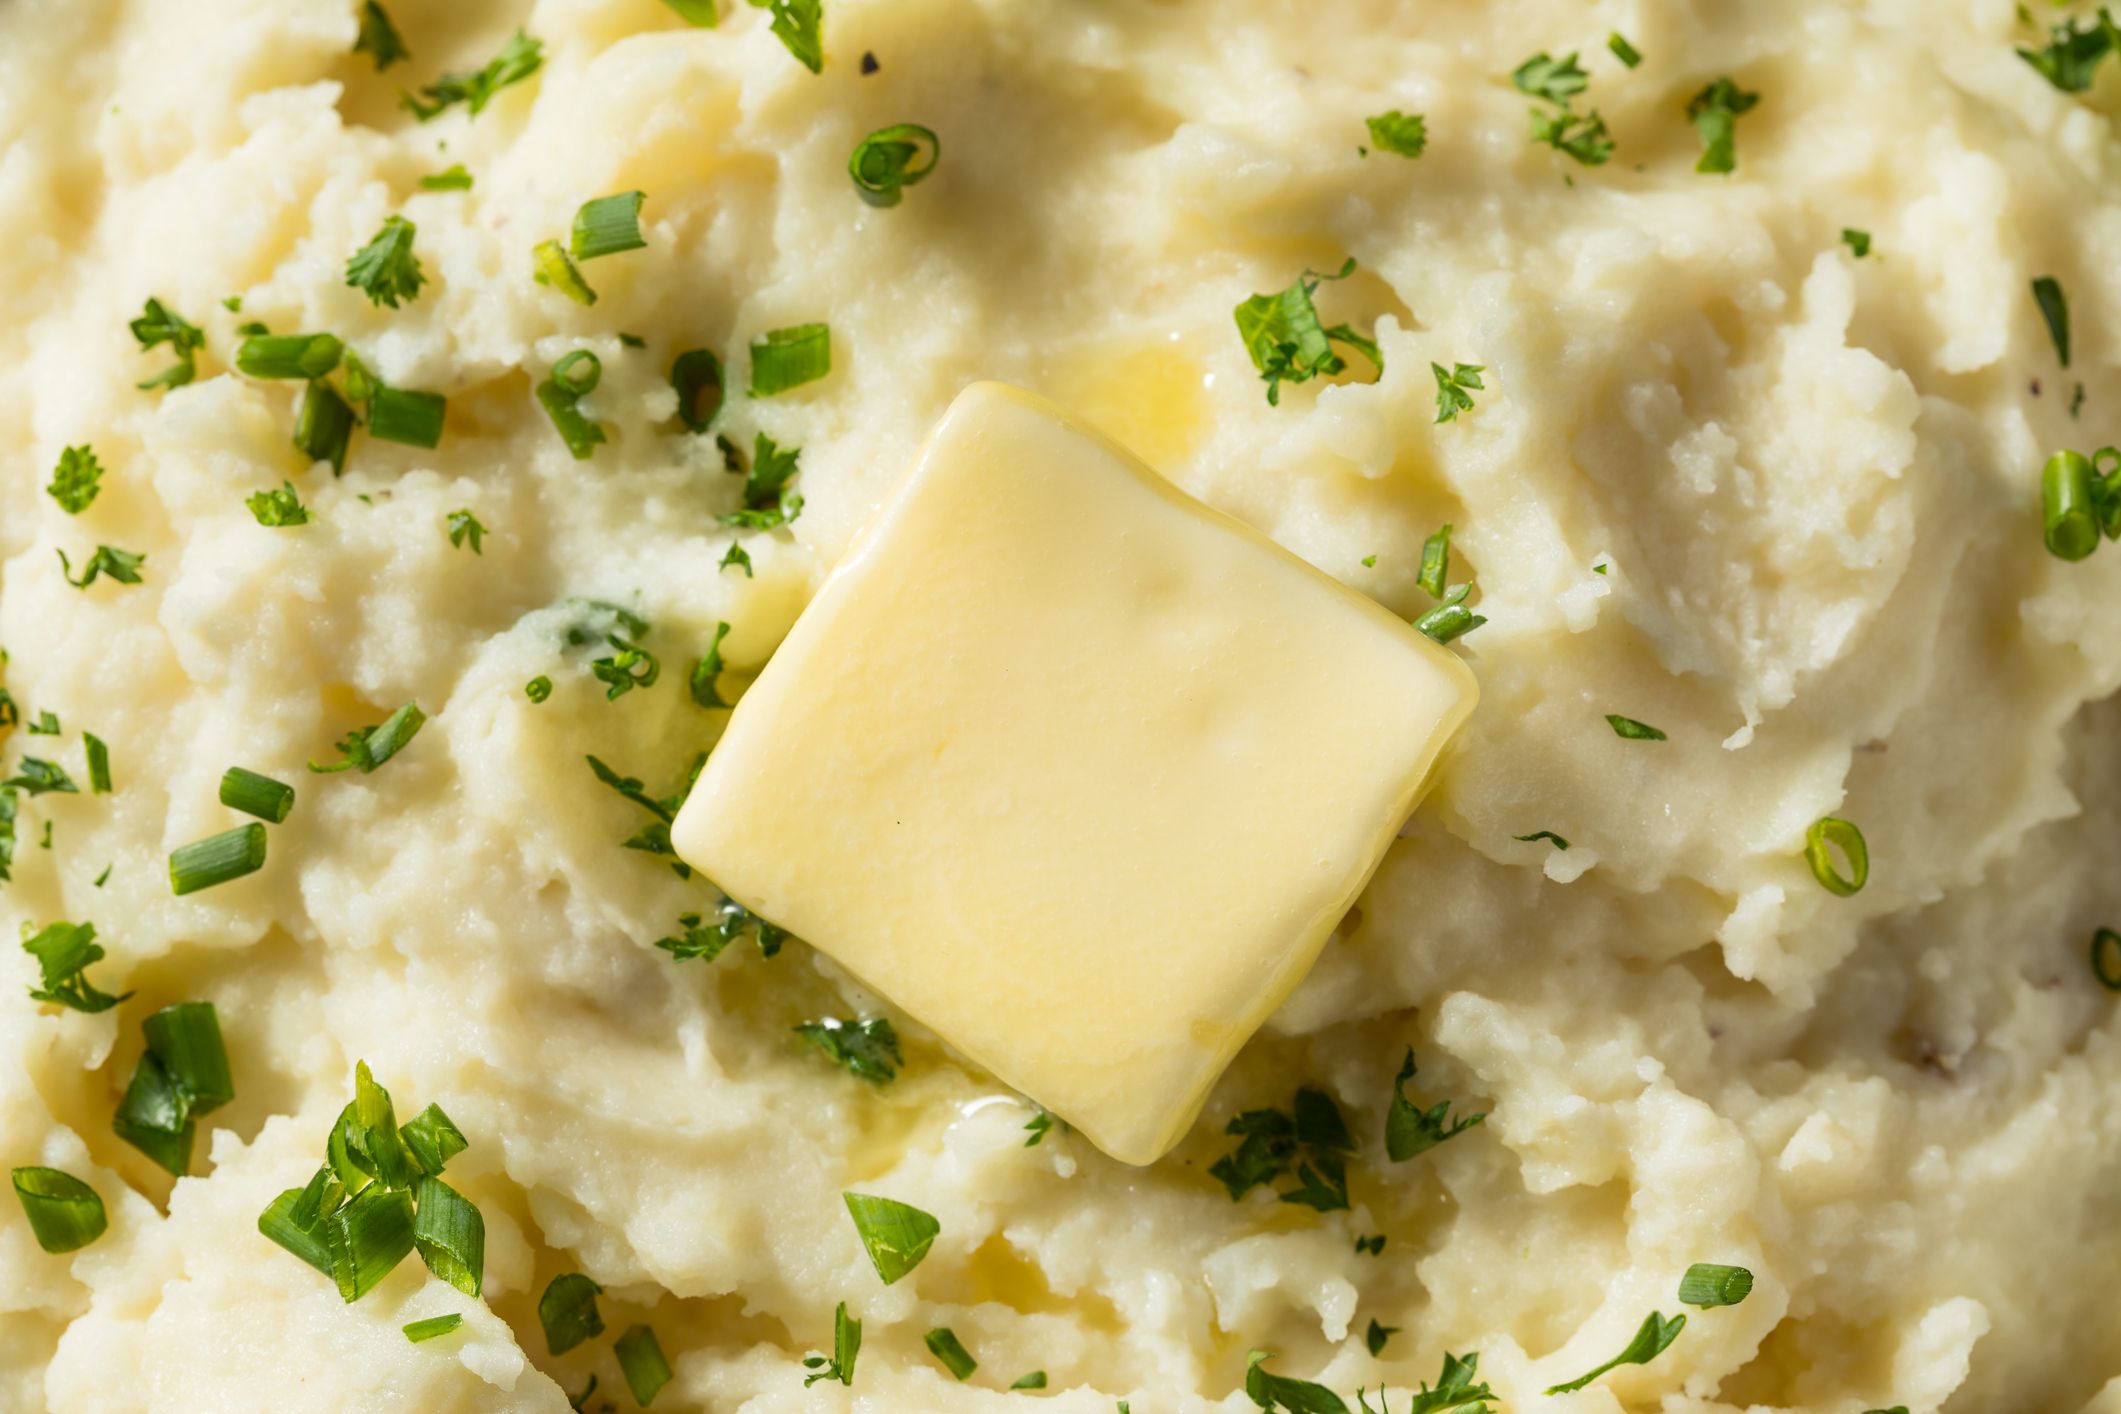 https://hips.hearstapps.com/hmg-prod/images/homemade-creamy-mashed-potatoes-royalty-free-image-1698158526.jpg